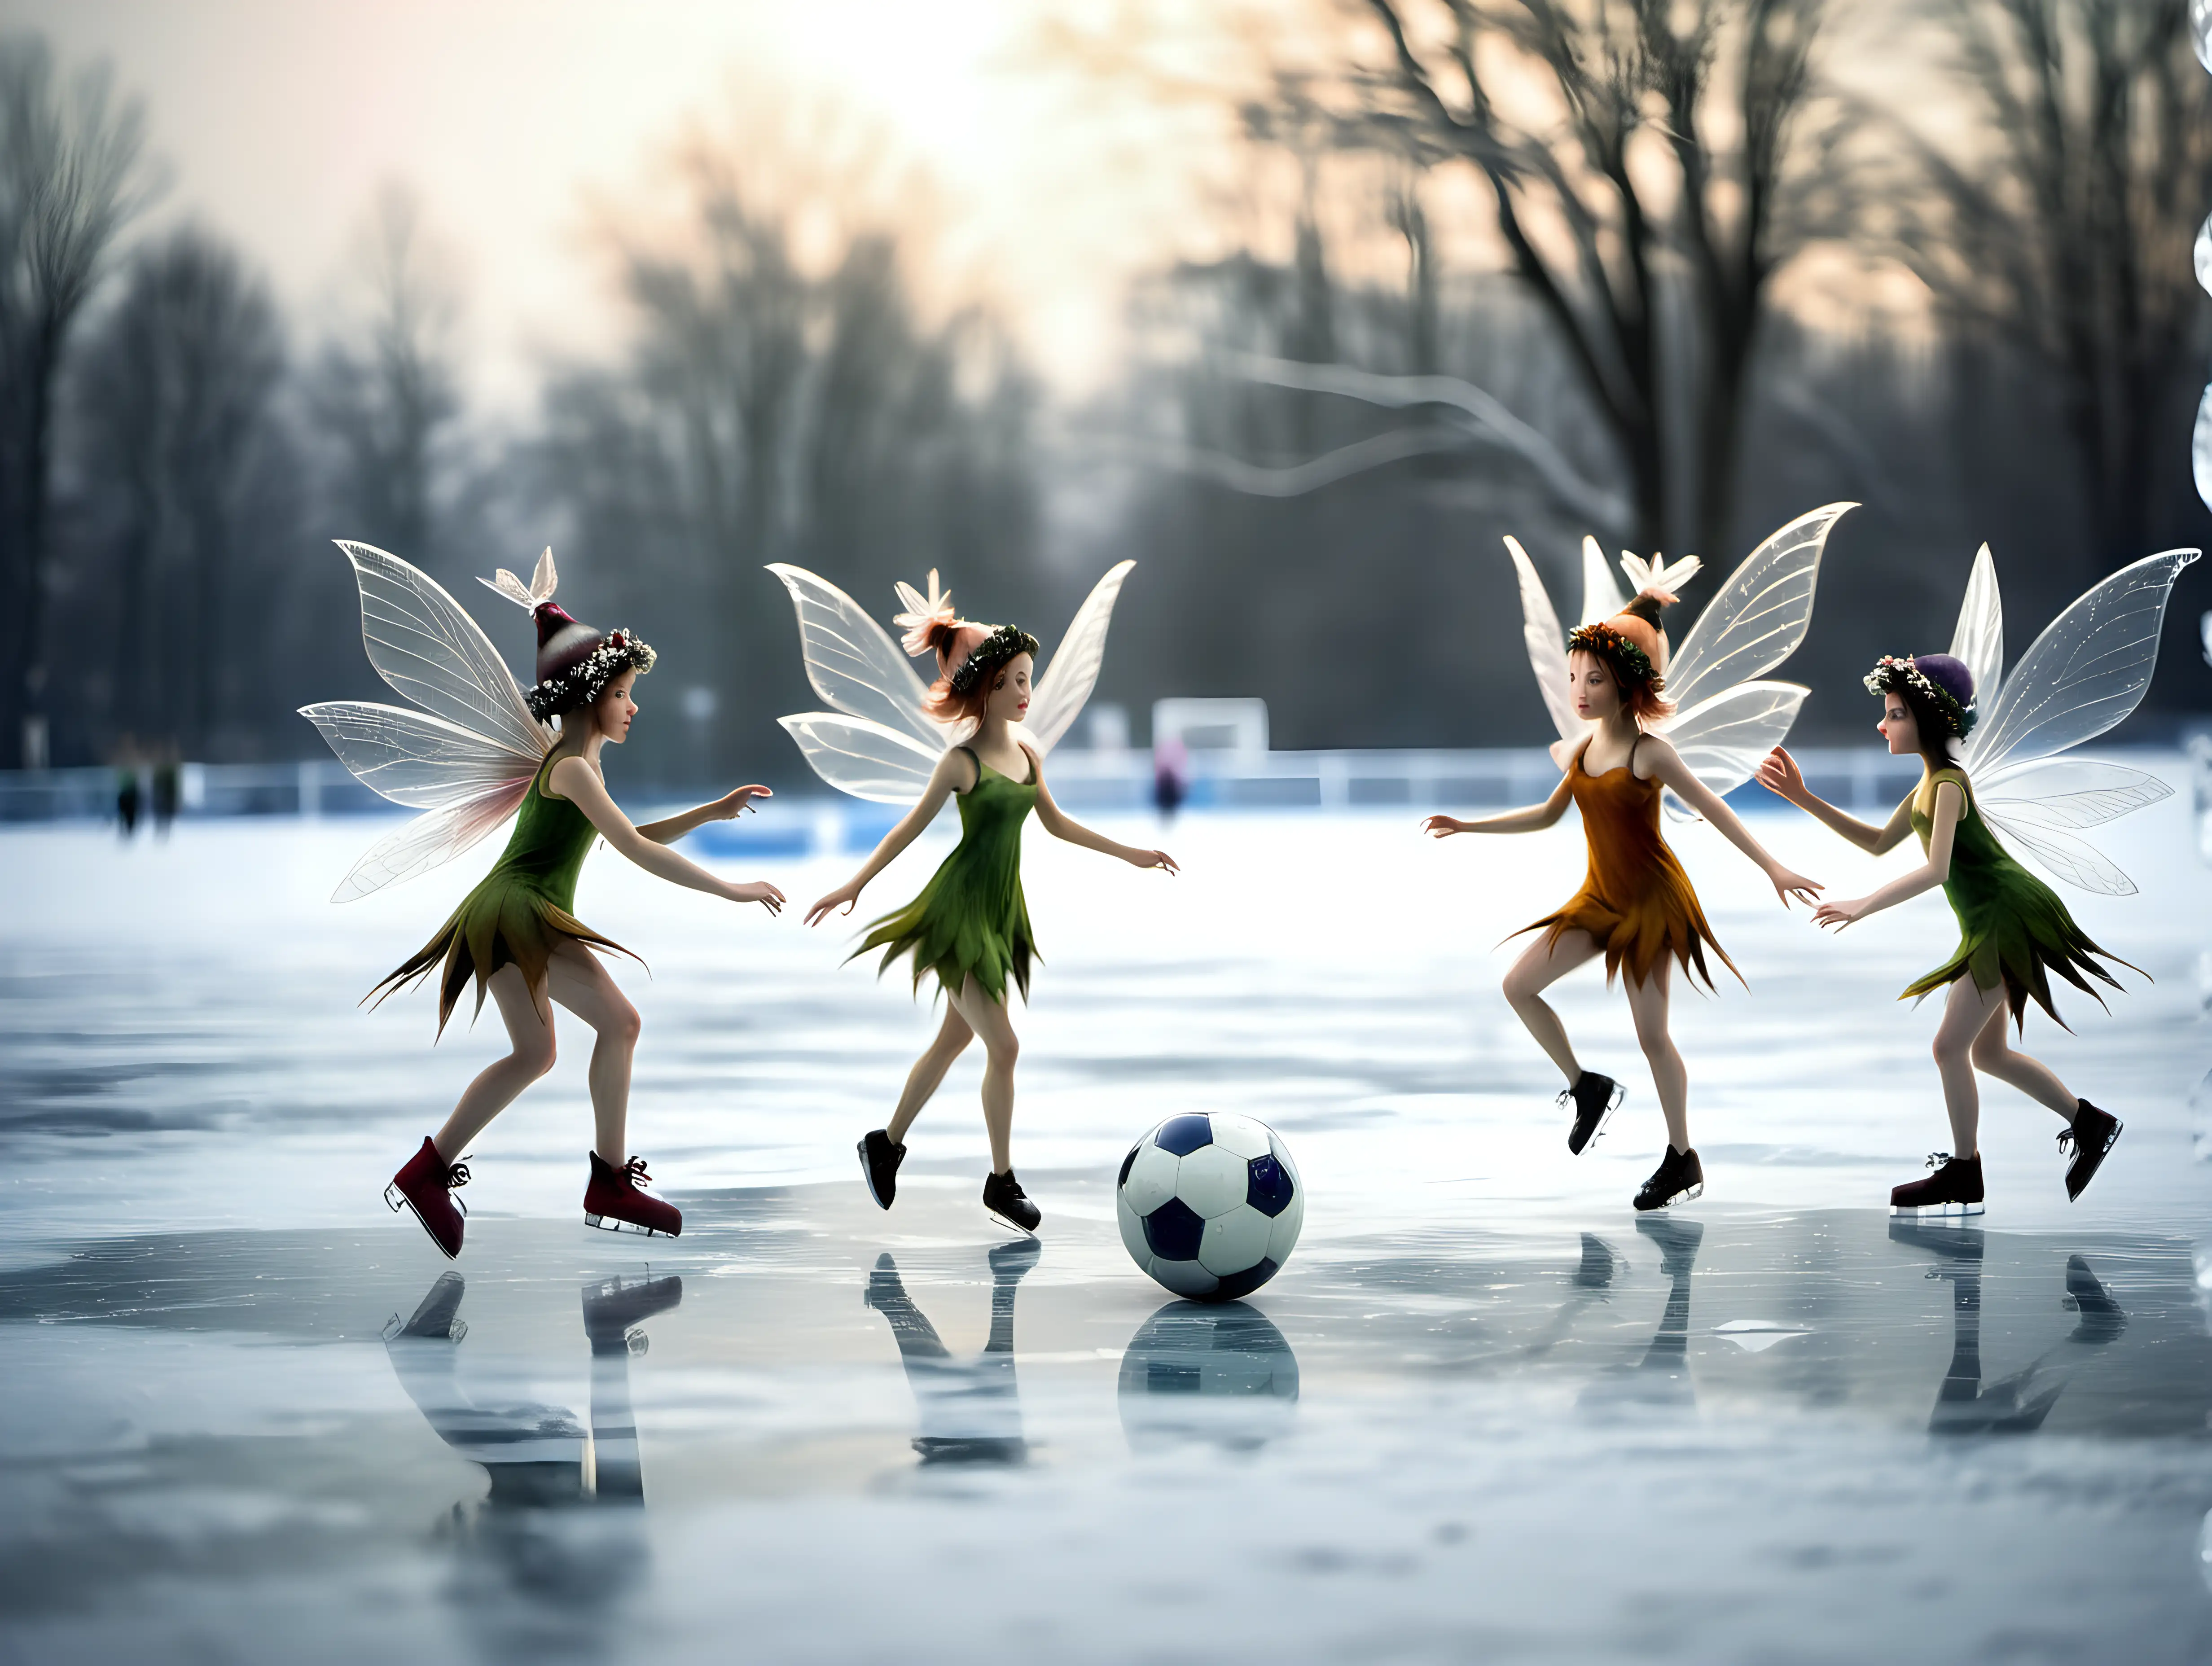 faires playing football on ice